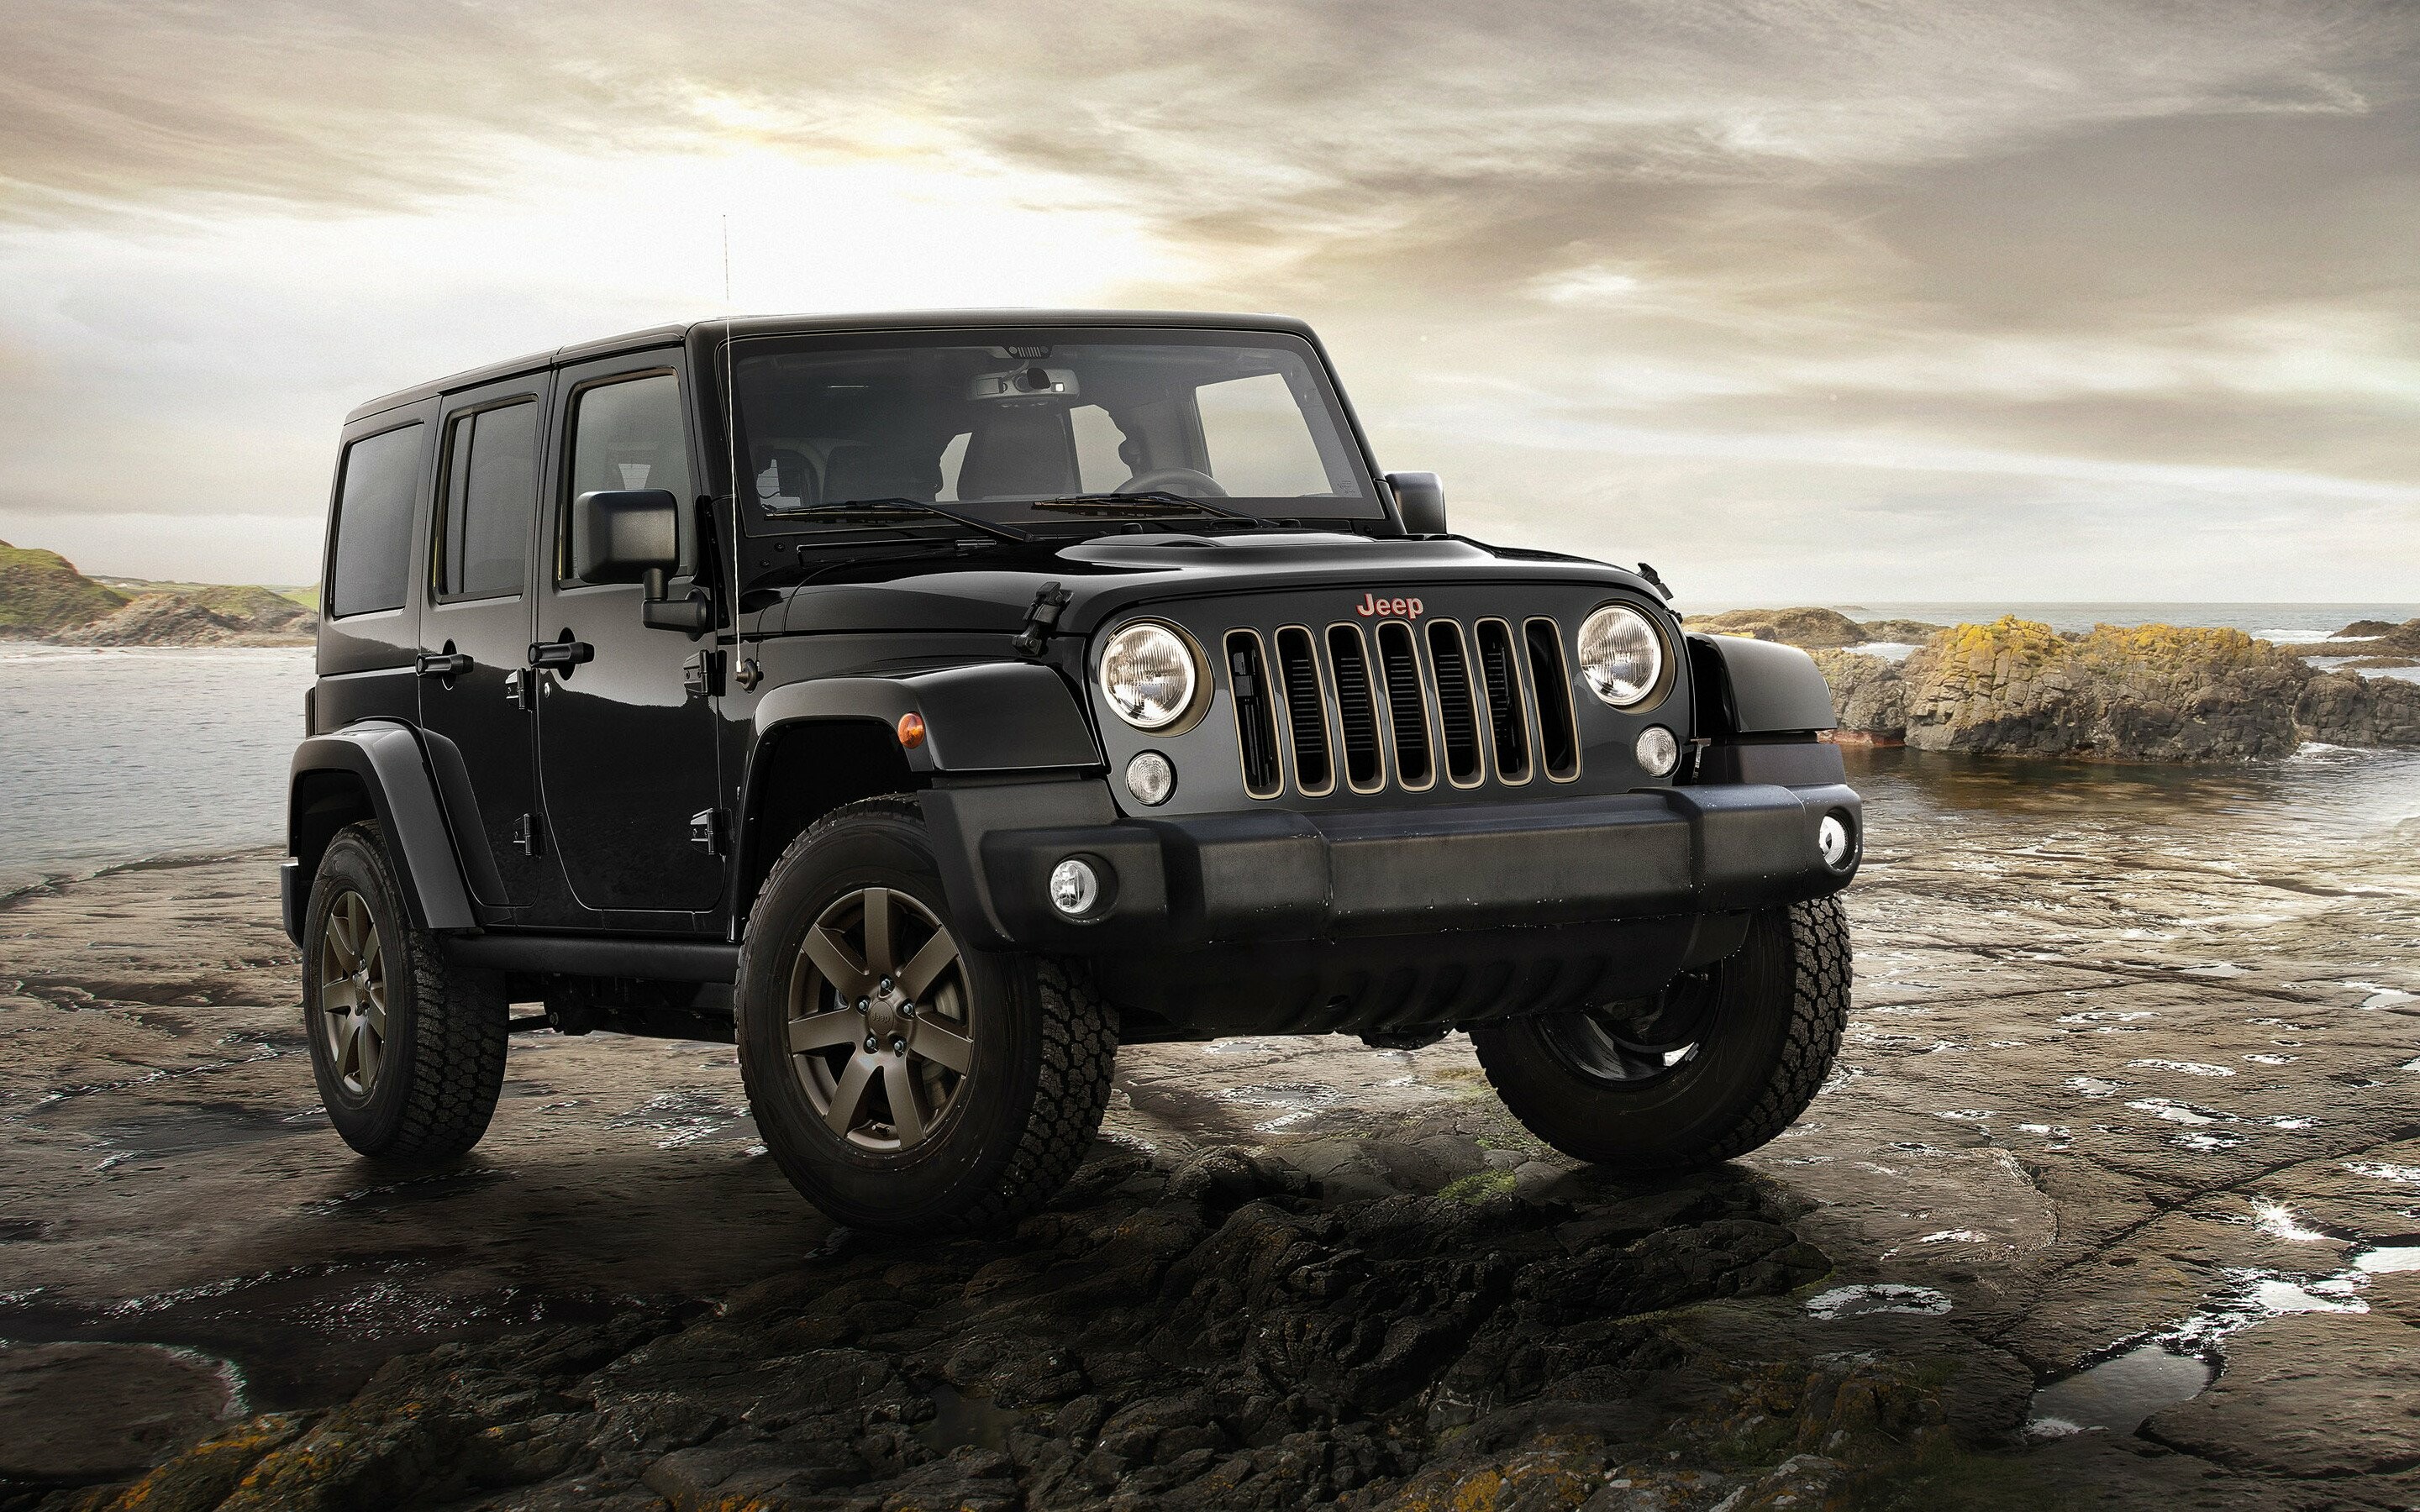 Jeep Wrangler: The first model was announced in February 1986 at the 1986 Chicago Auto Show. 2880x1800 HD Background.